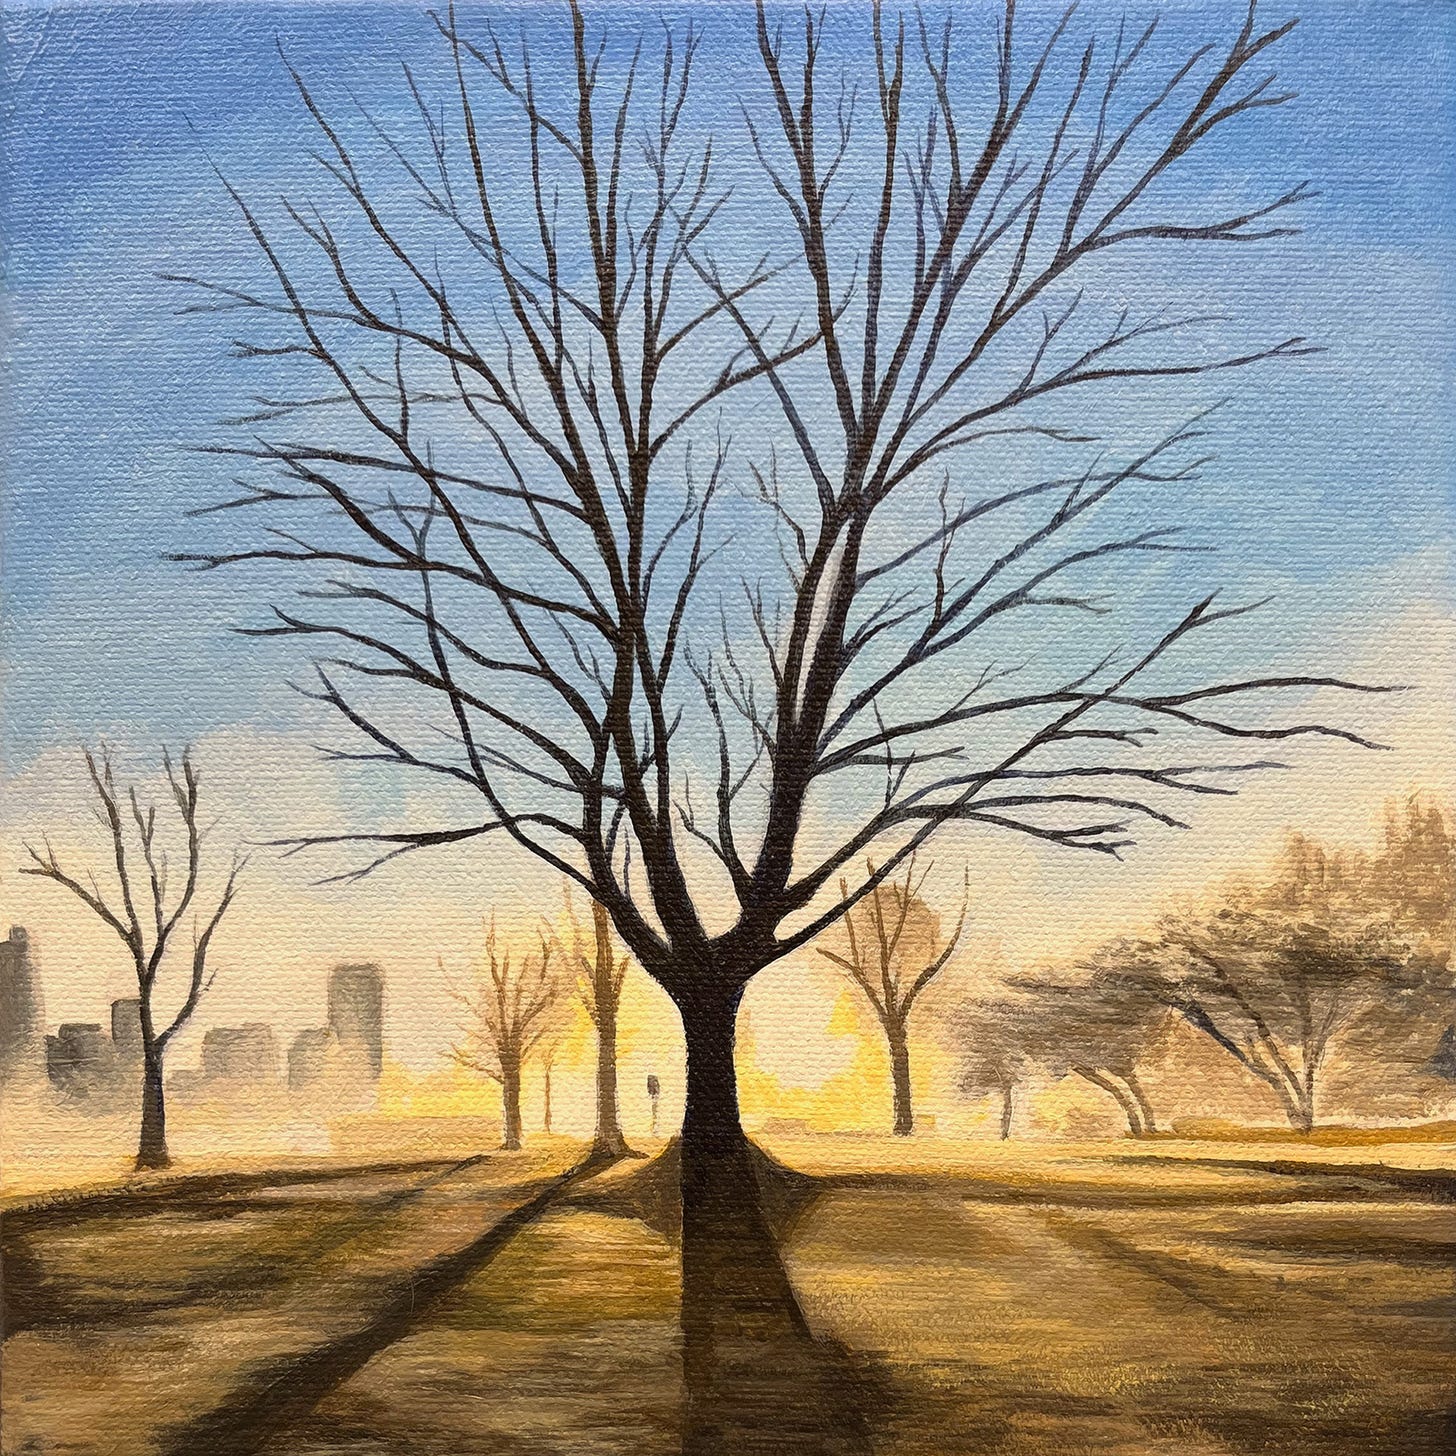 Painting of a large spindly tree in a frosty field against a golden winter sunrise.